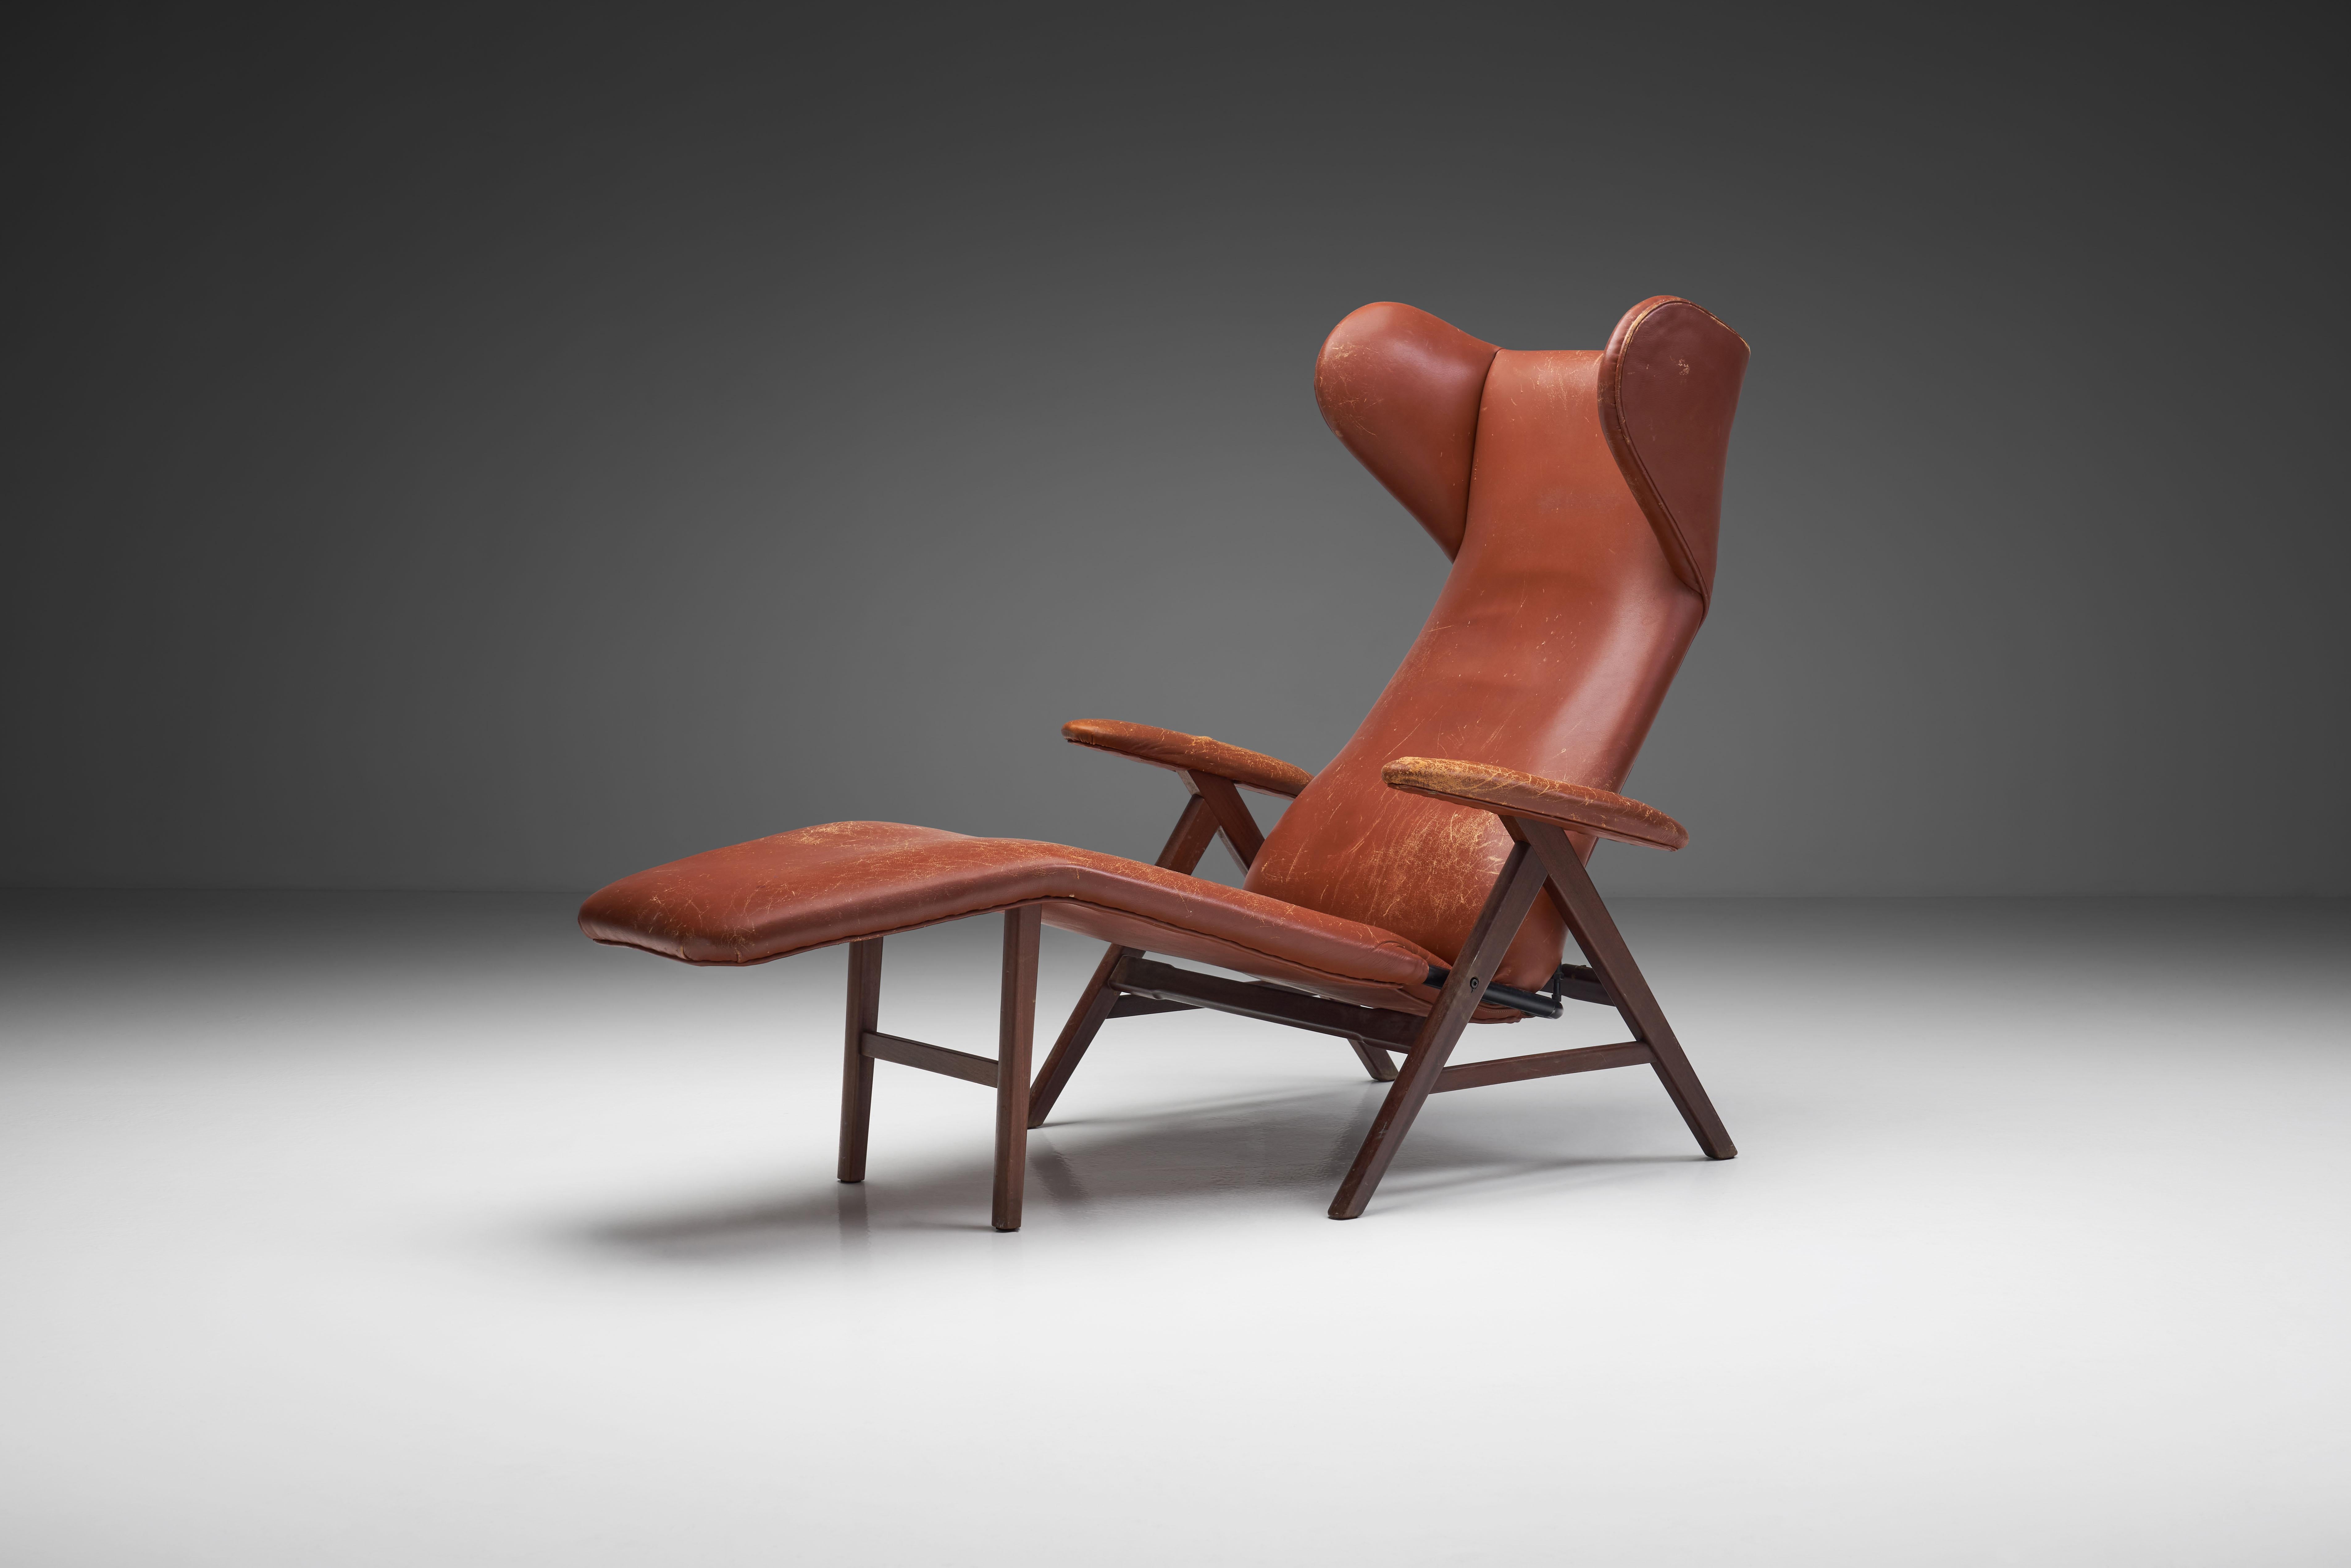 Brown chaise lounge with stained beech frame, commonly attributed to H.W. Klein for Bramin.

This wonderfully crafted lounge chair has a tilt function, which makes it extremely comfortable. The seat is extended in soft lines as a chaise lounge to